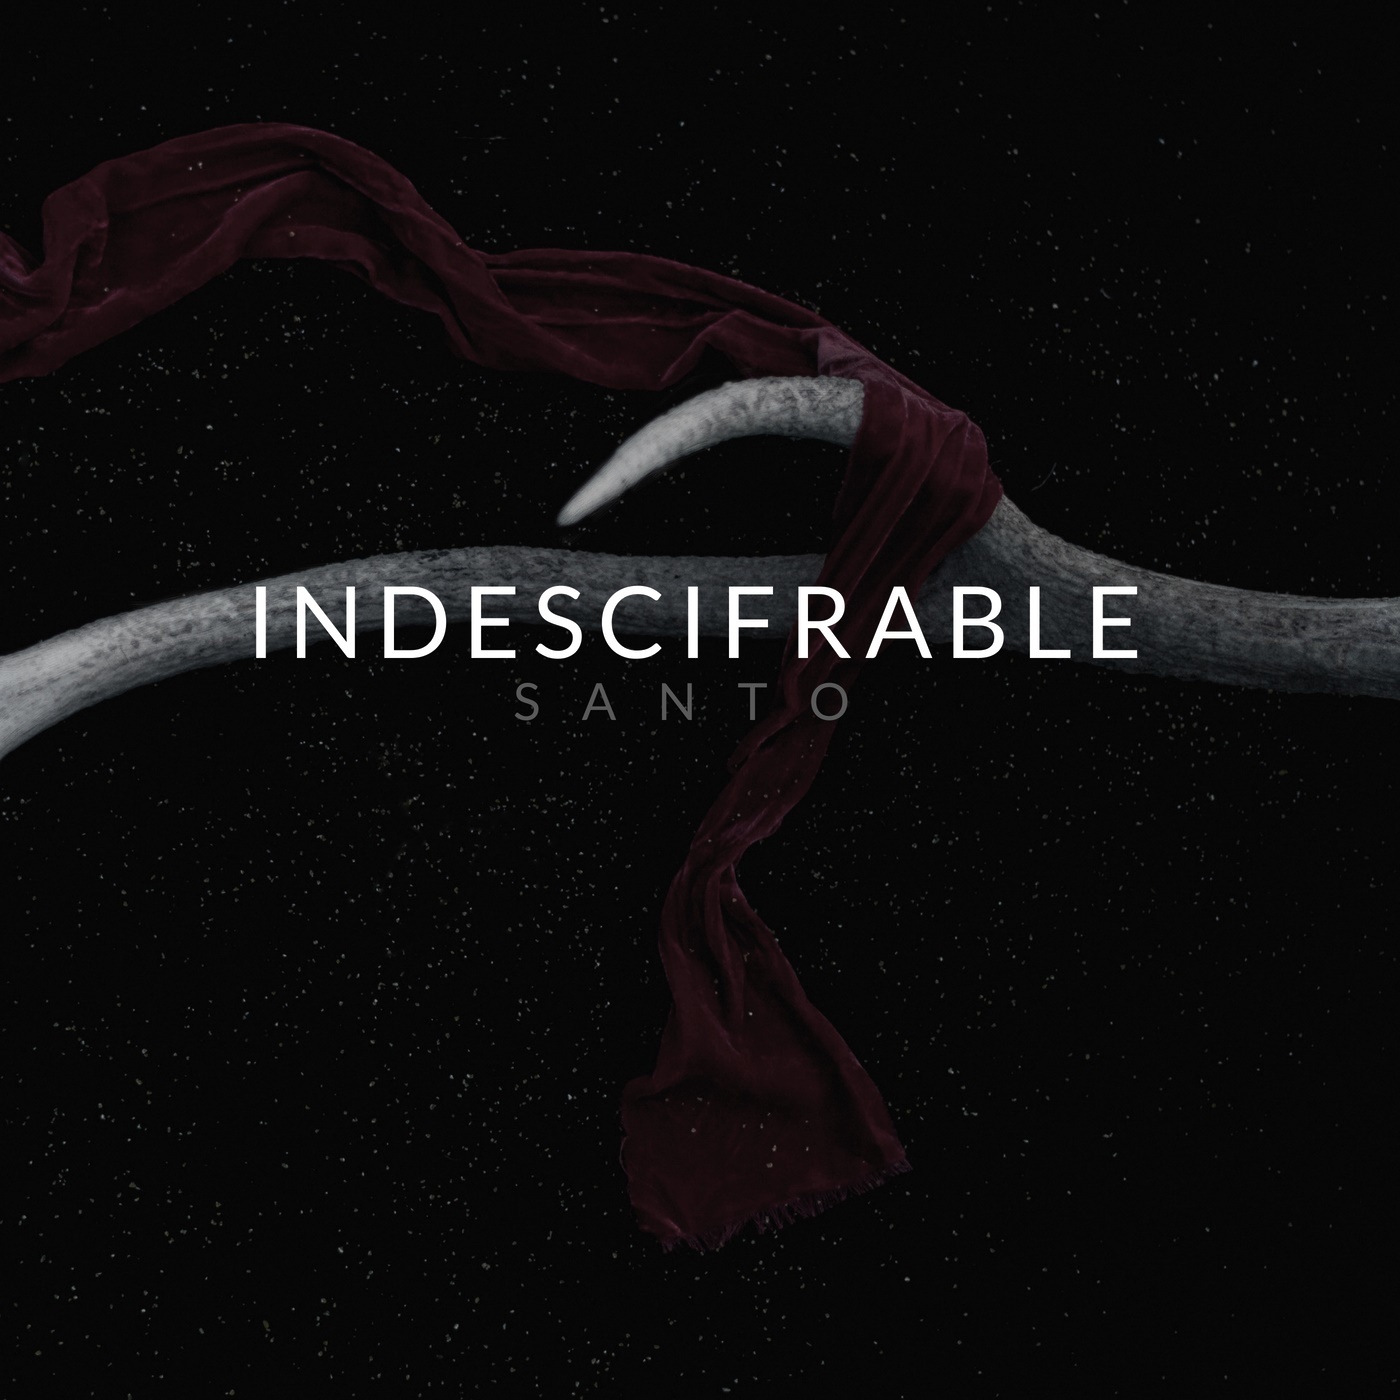 Indescifrable